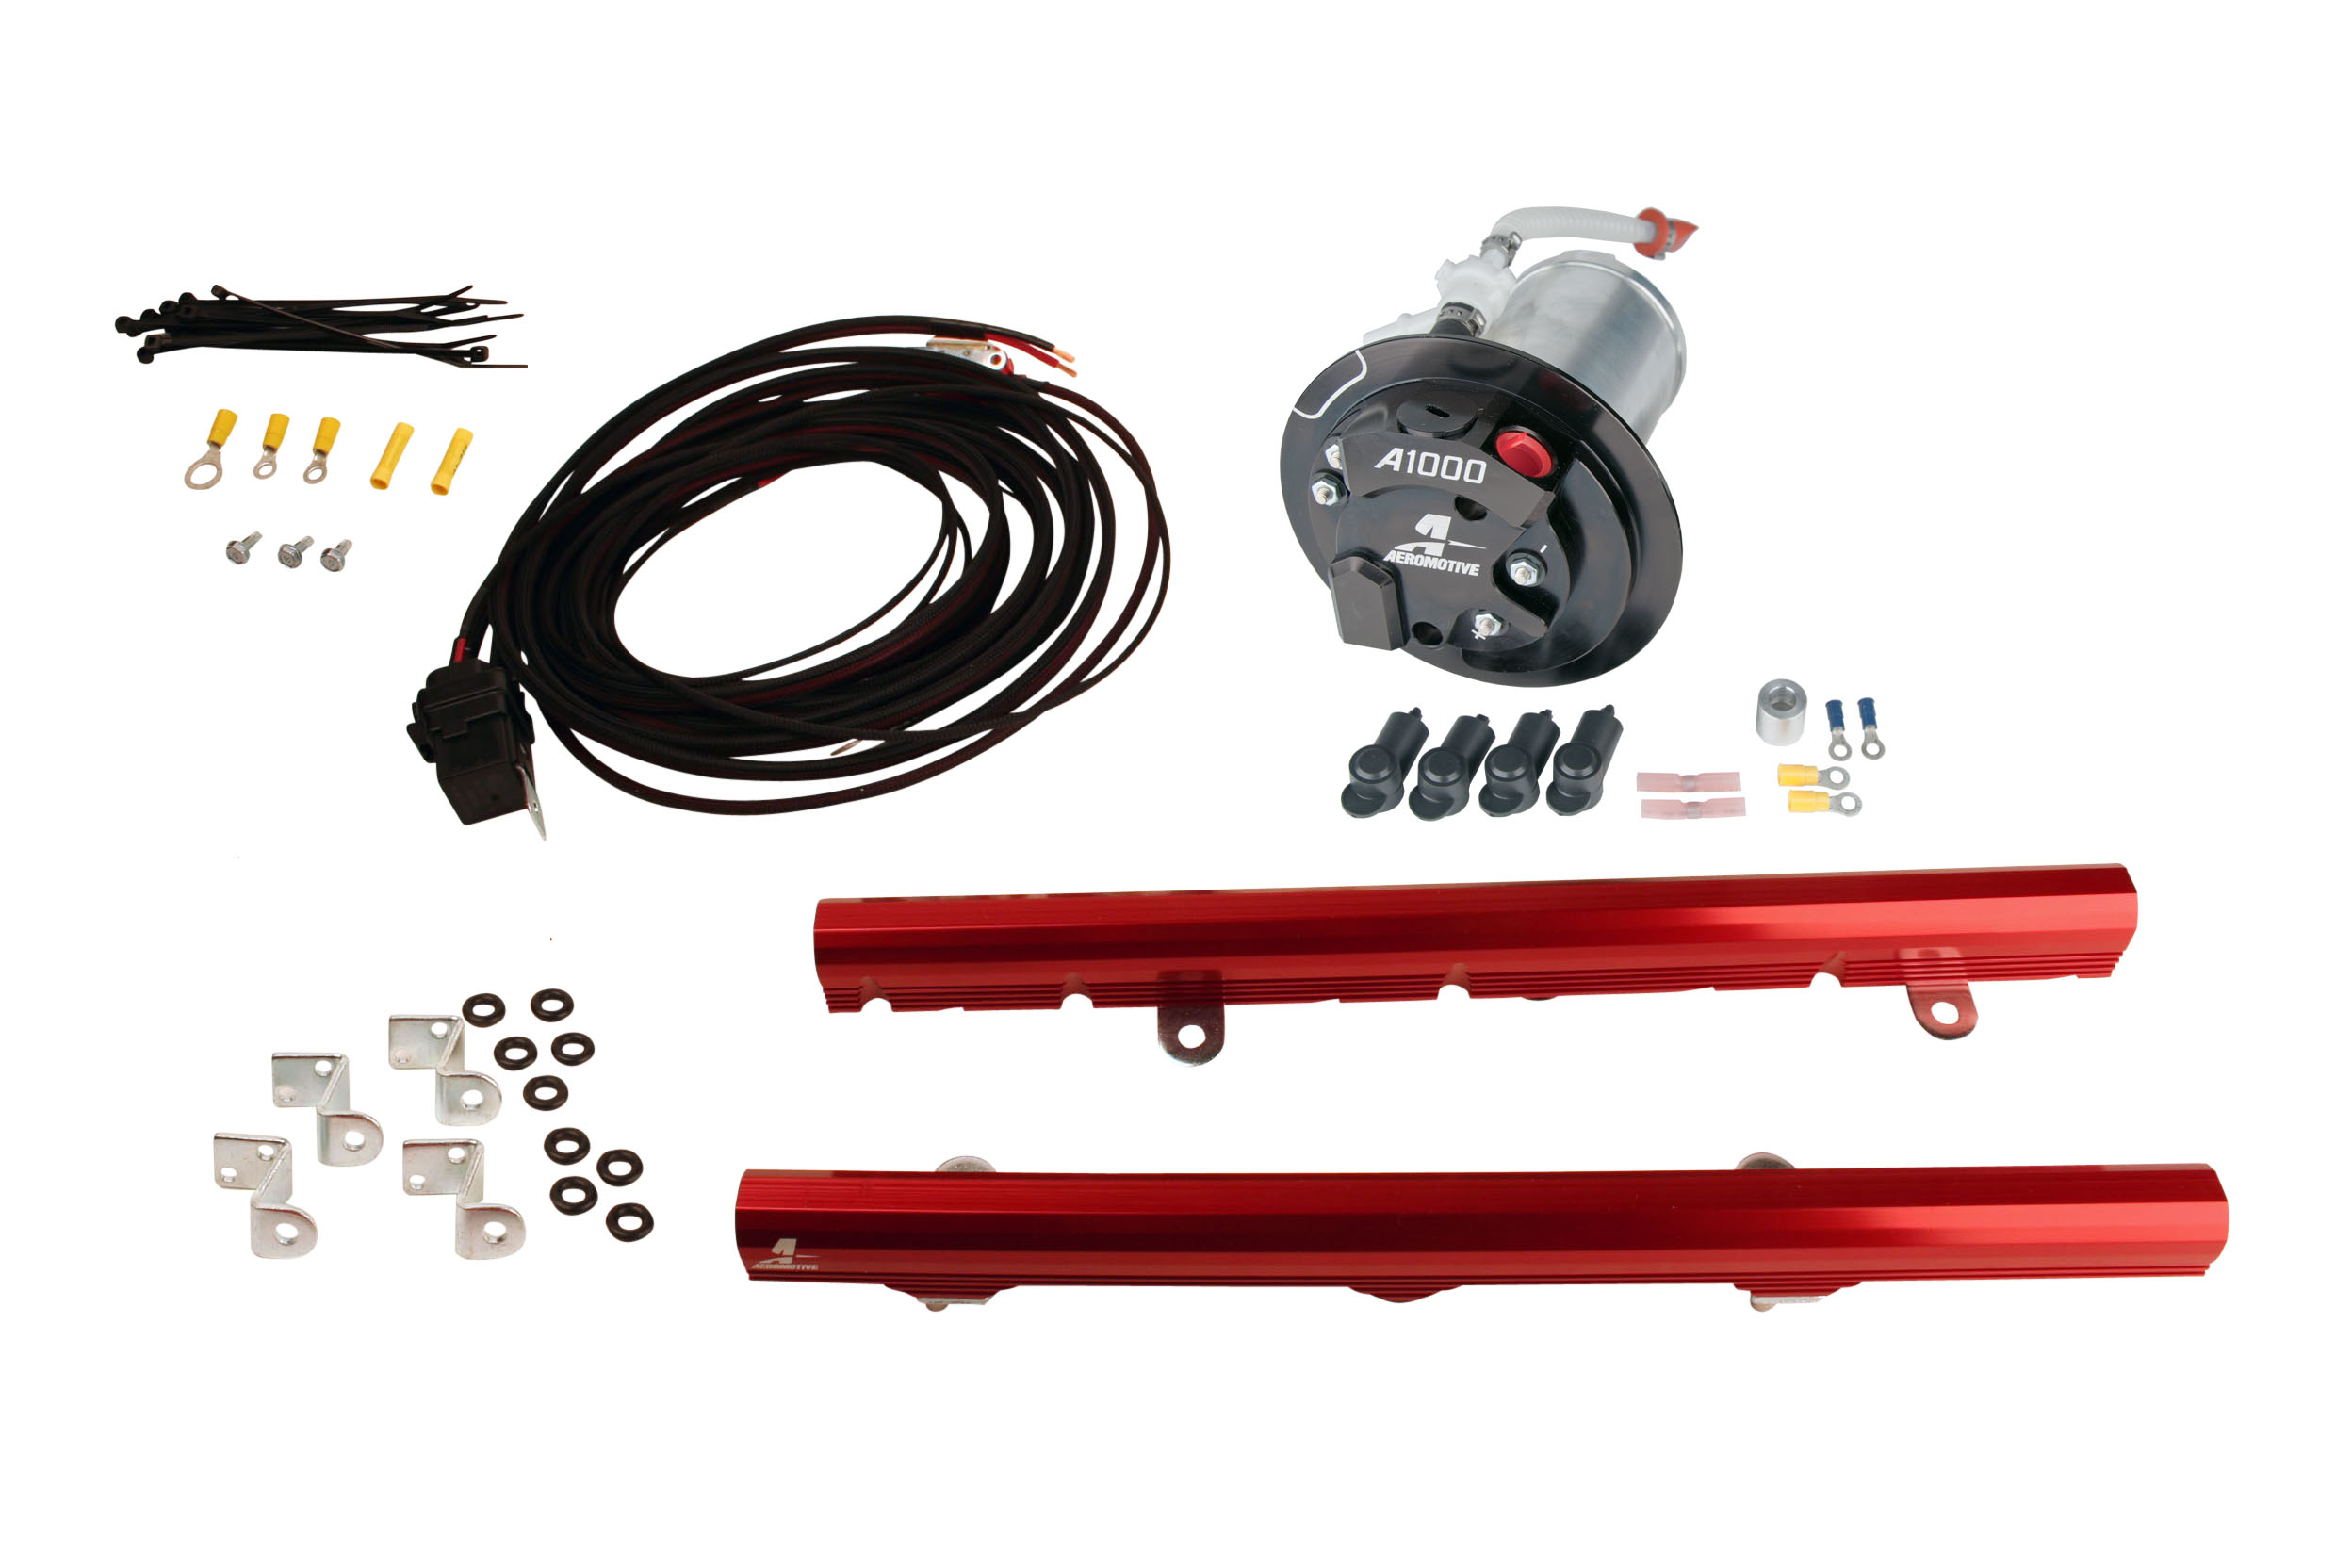 10-15 Camaro Stealth A1000 Race Fuel System